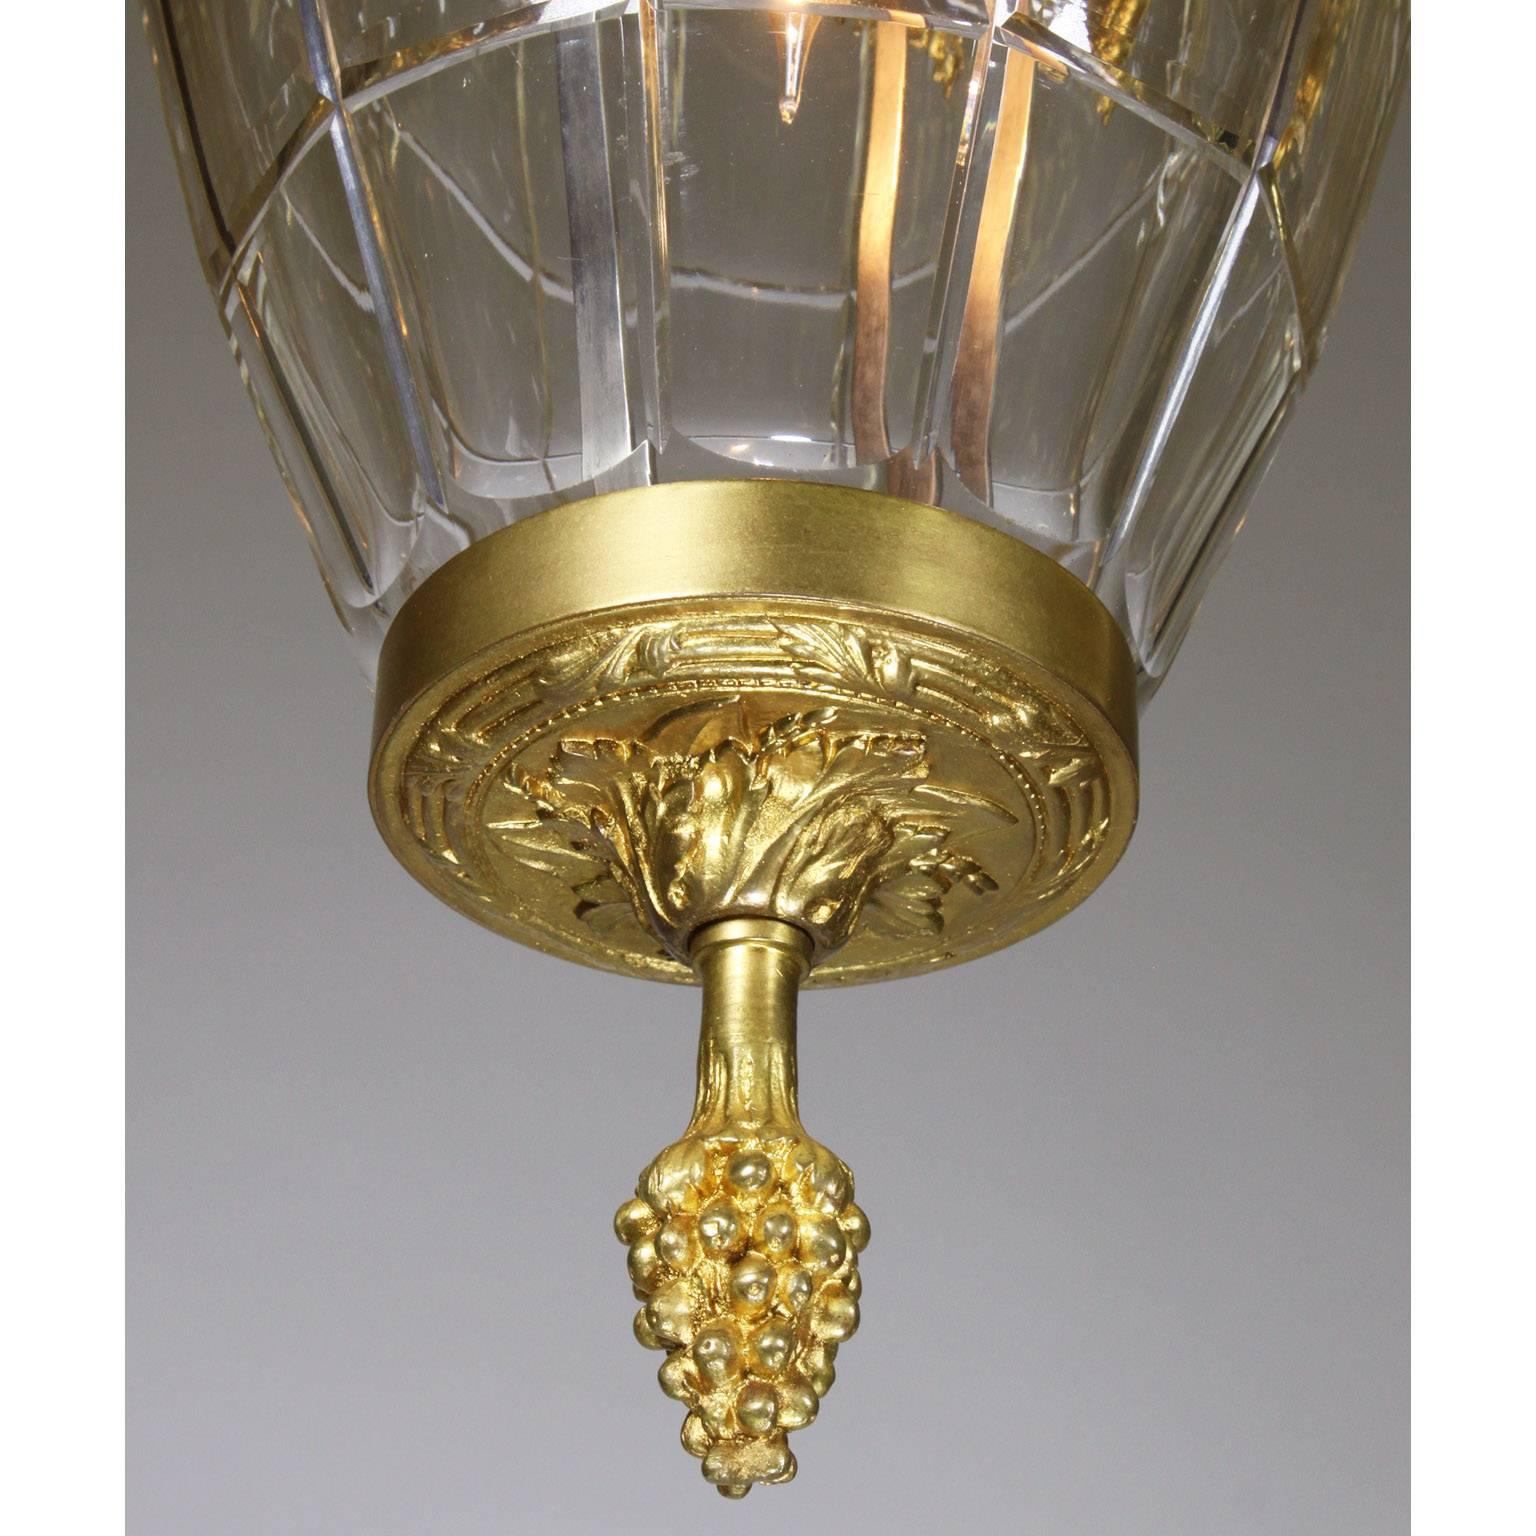 Early 20th Century French 19th-20th Century Gilt-Bronze and Molded Glass 